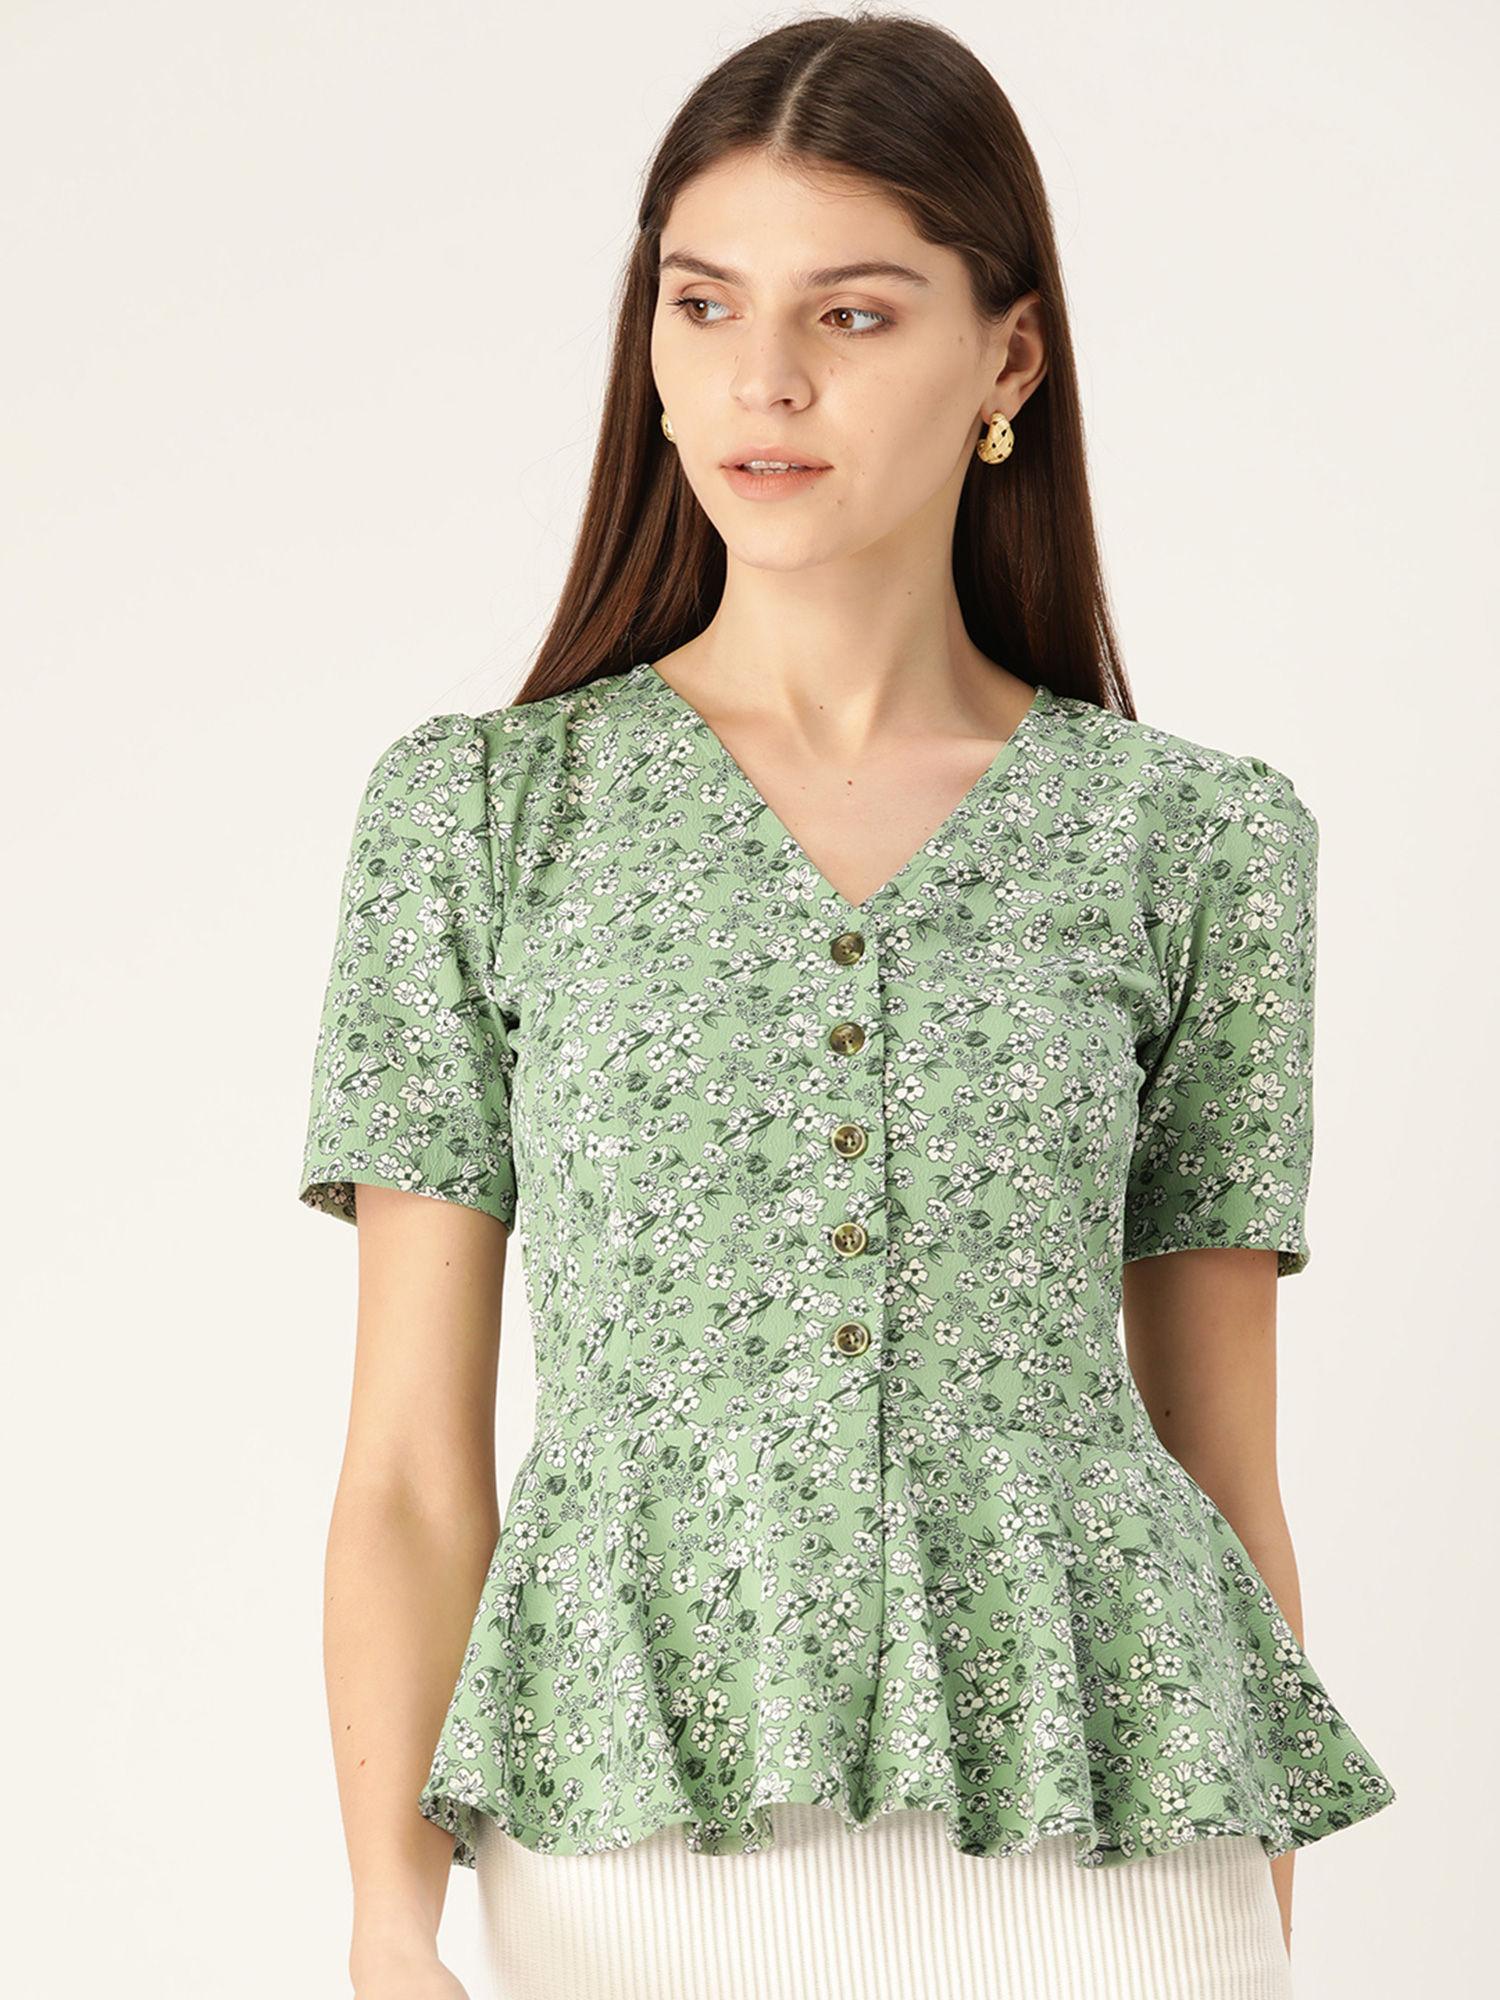 green floral top